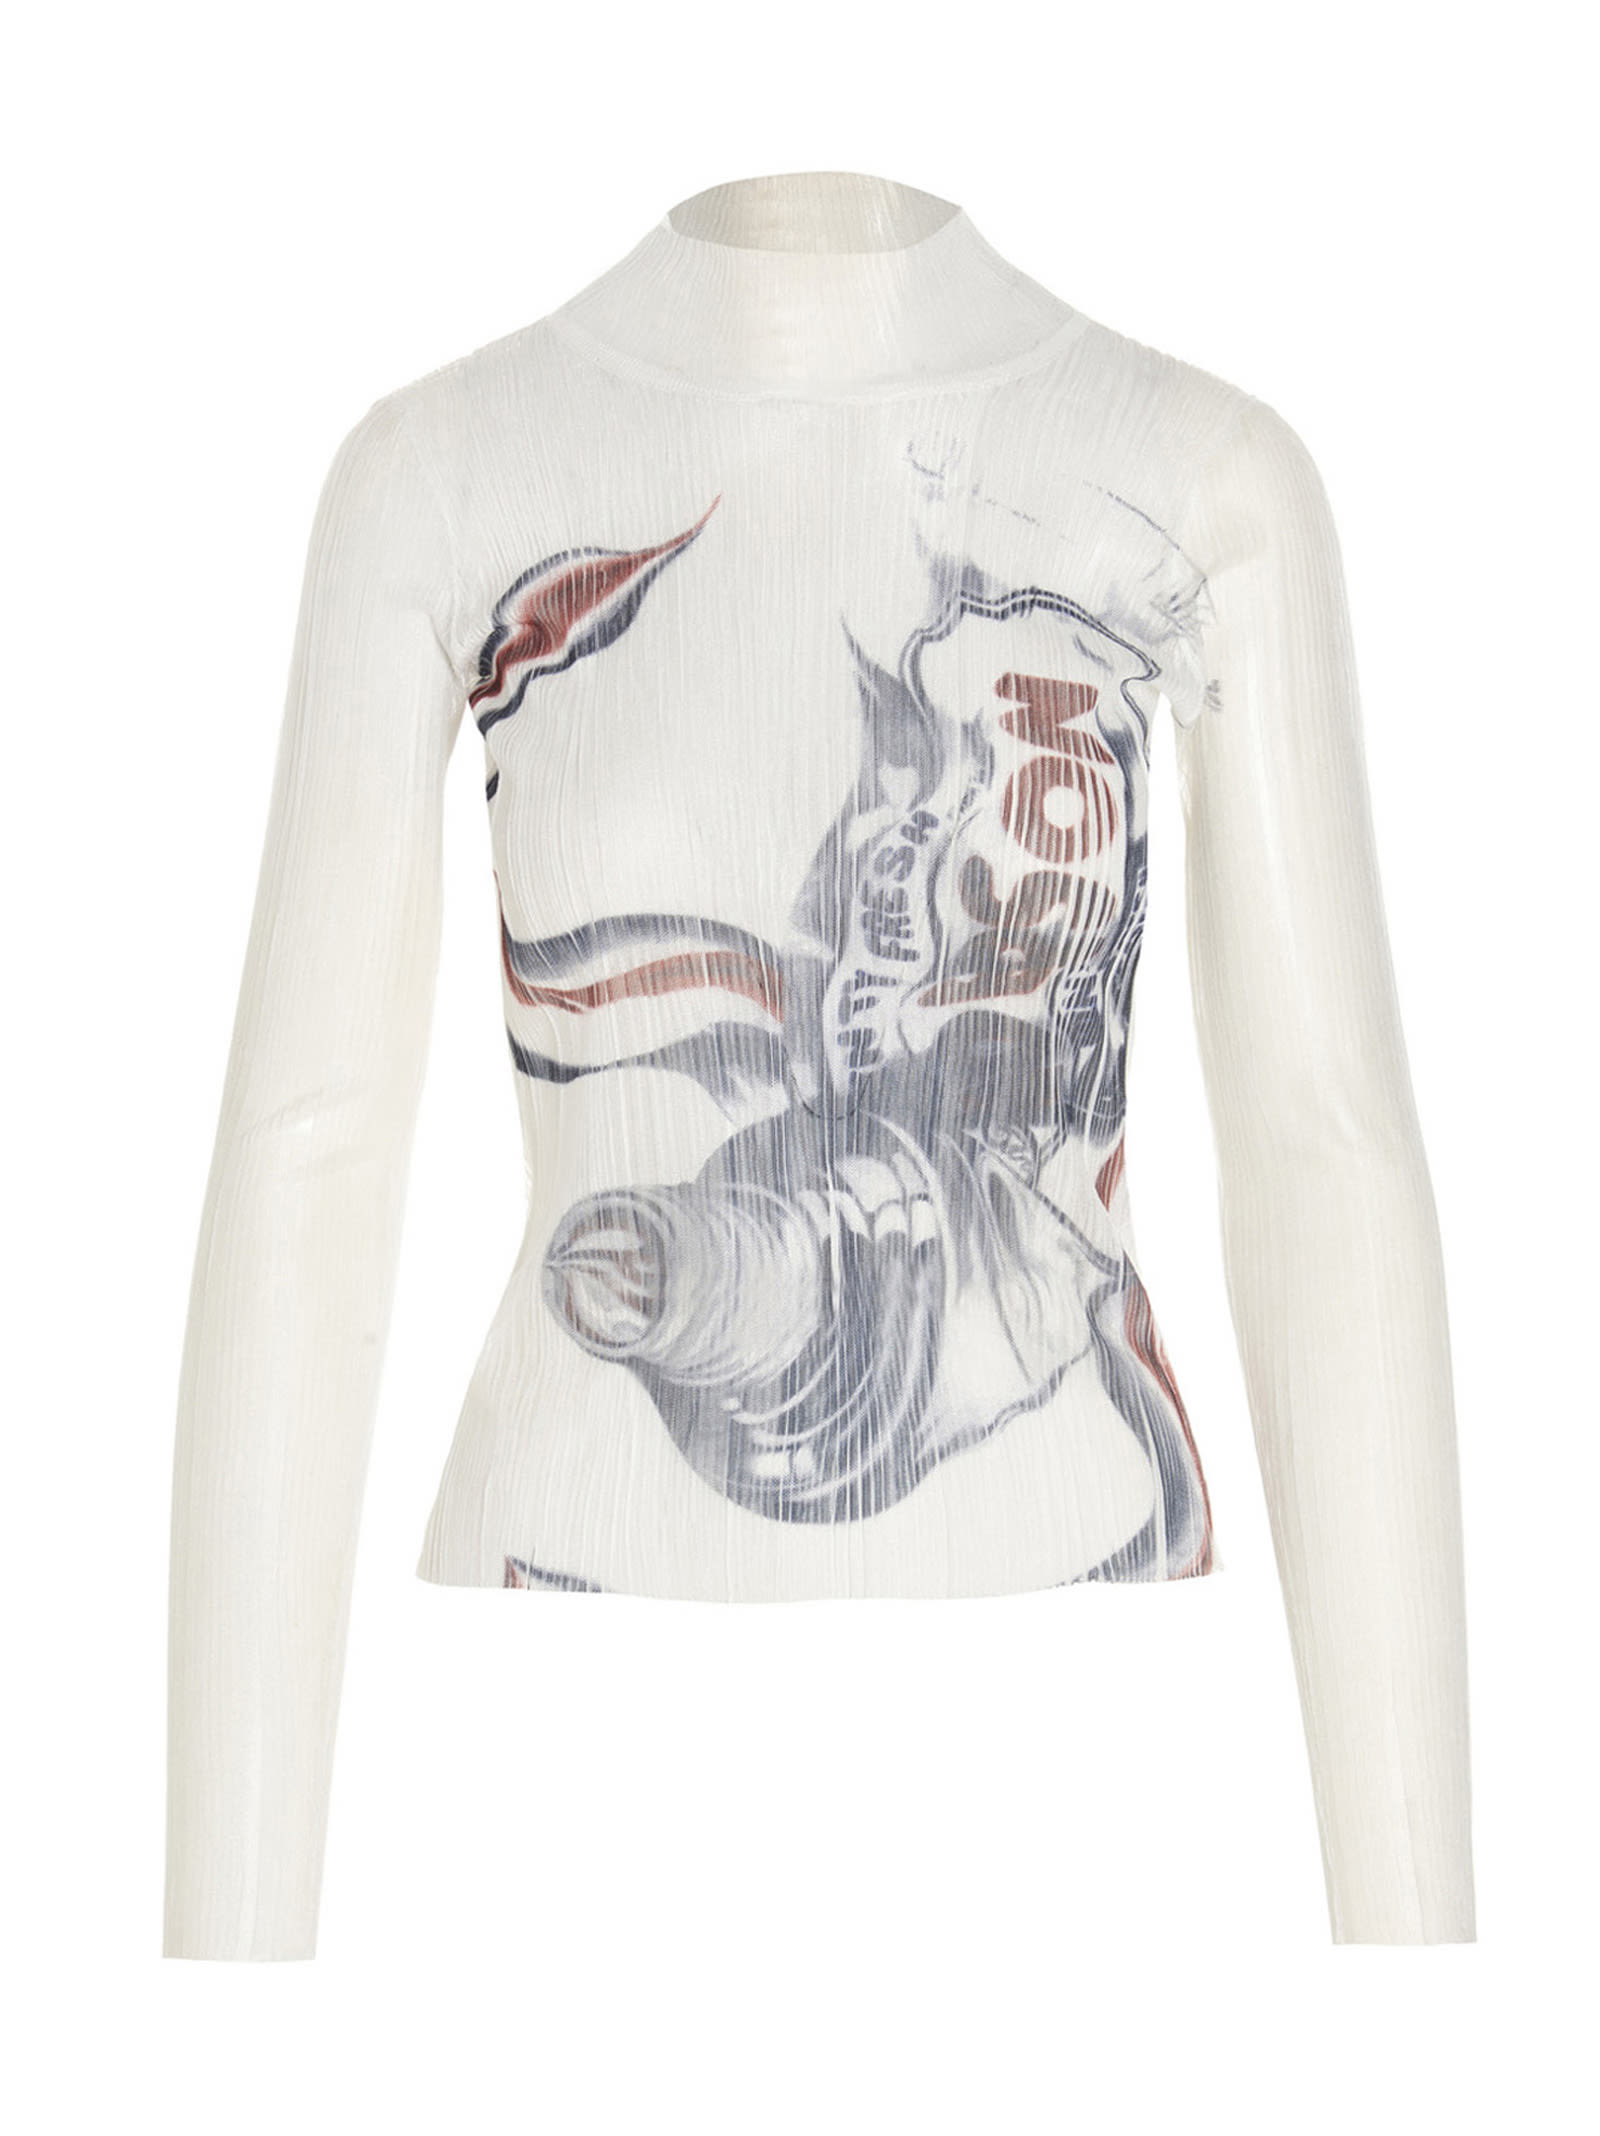 J.W. Anderson Printed Sweater